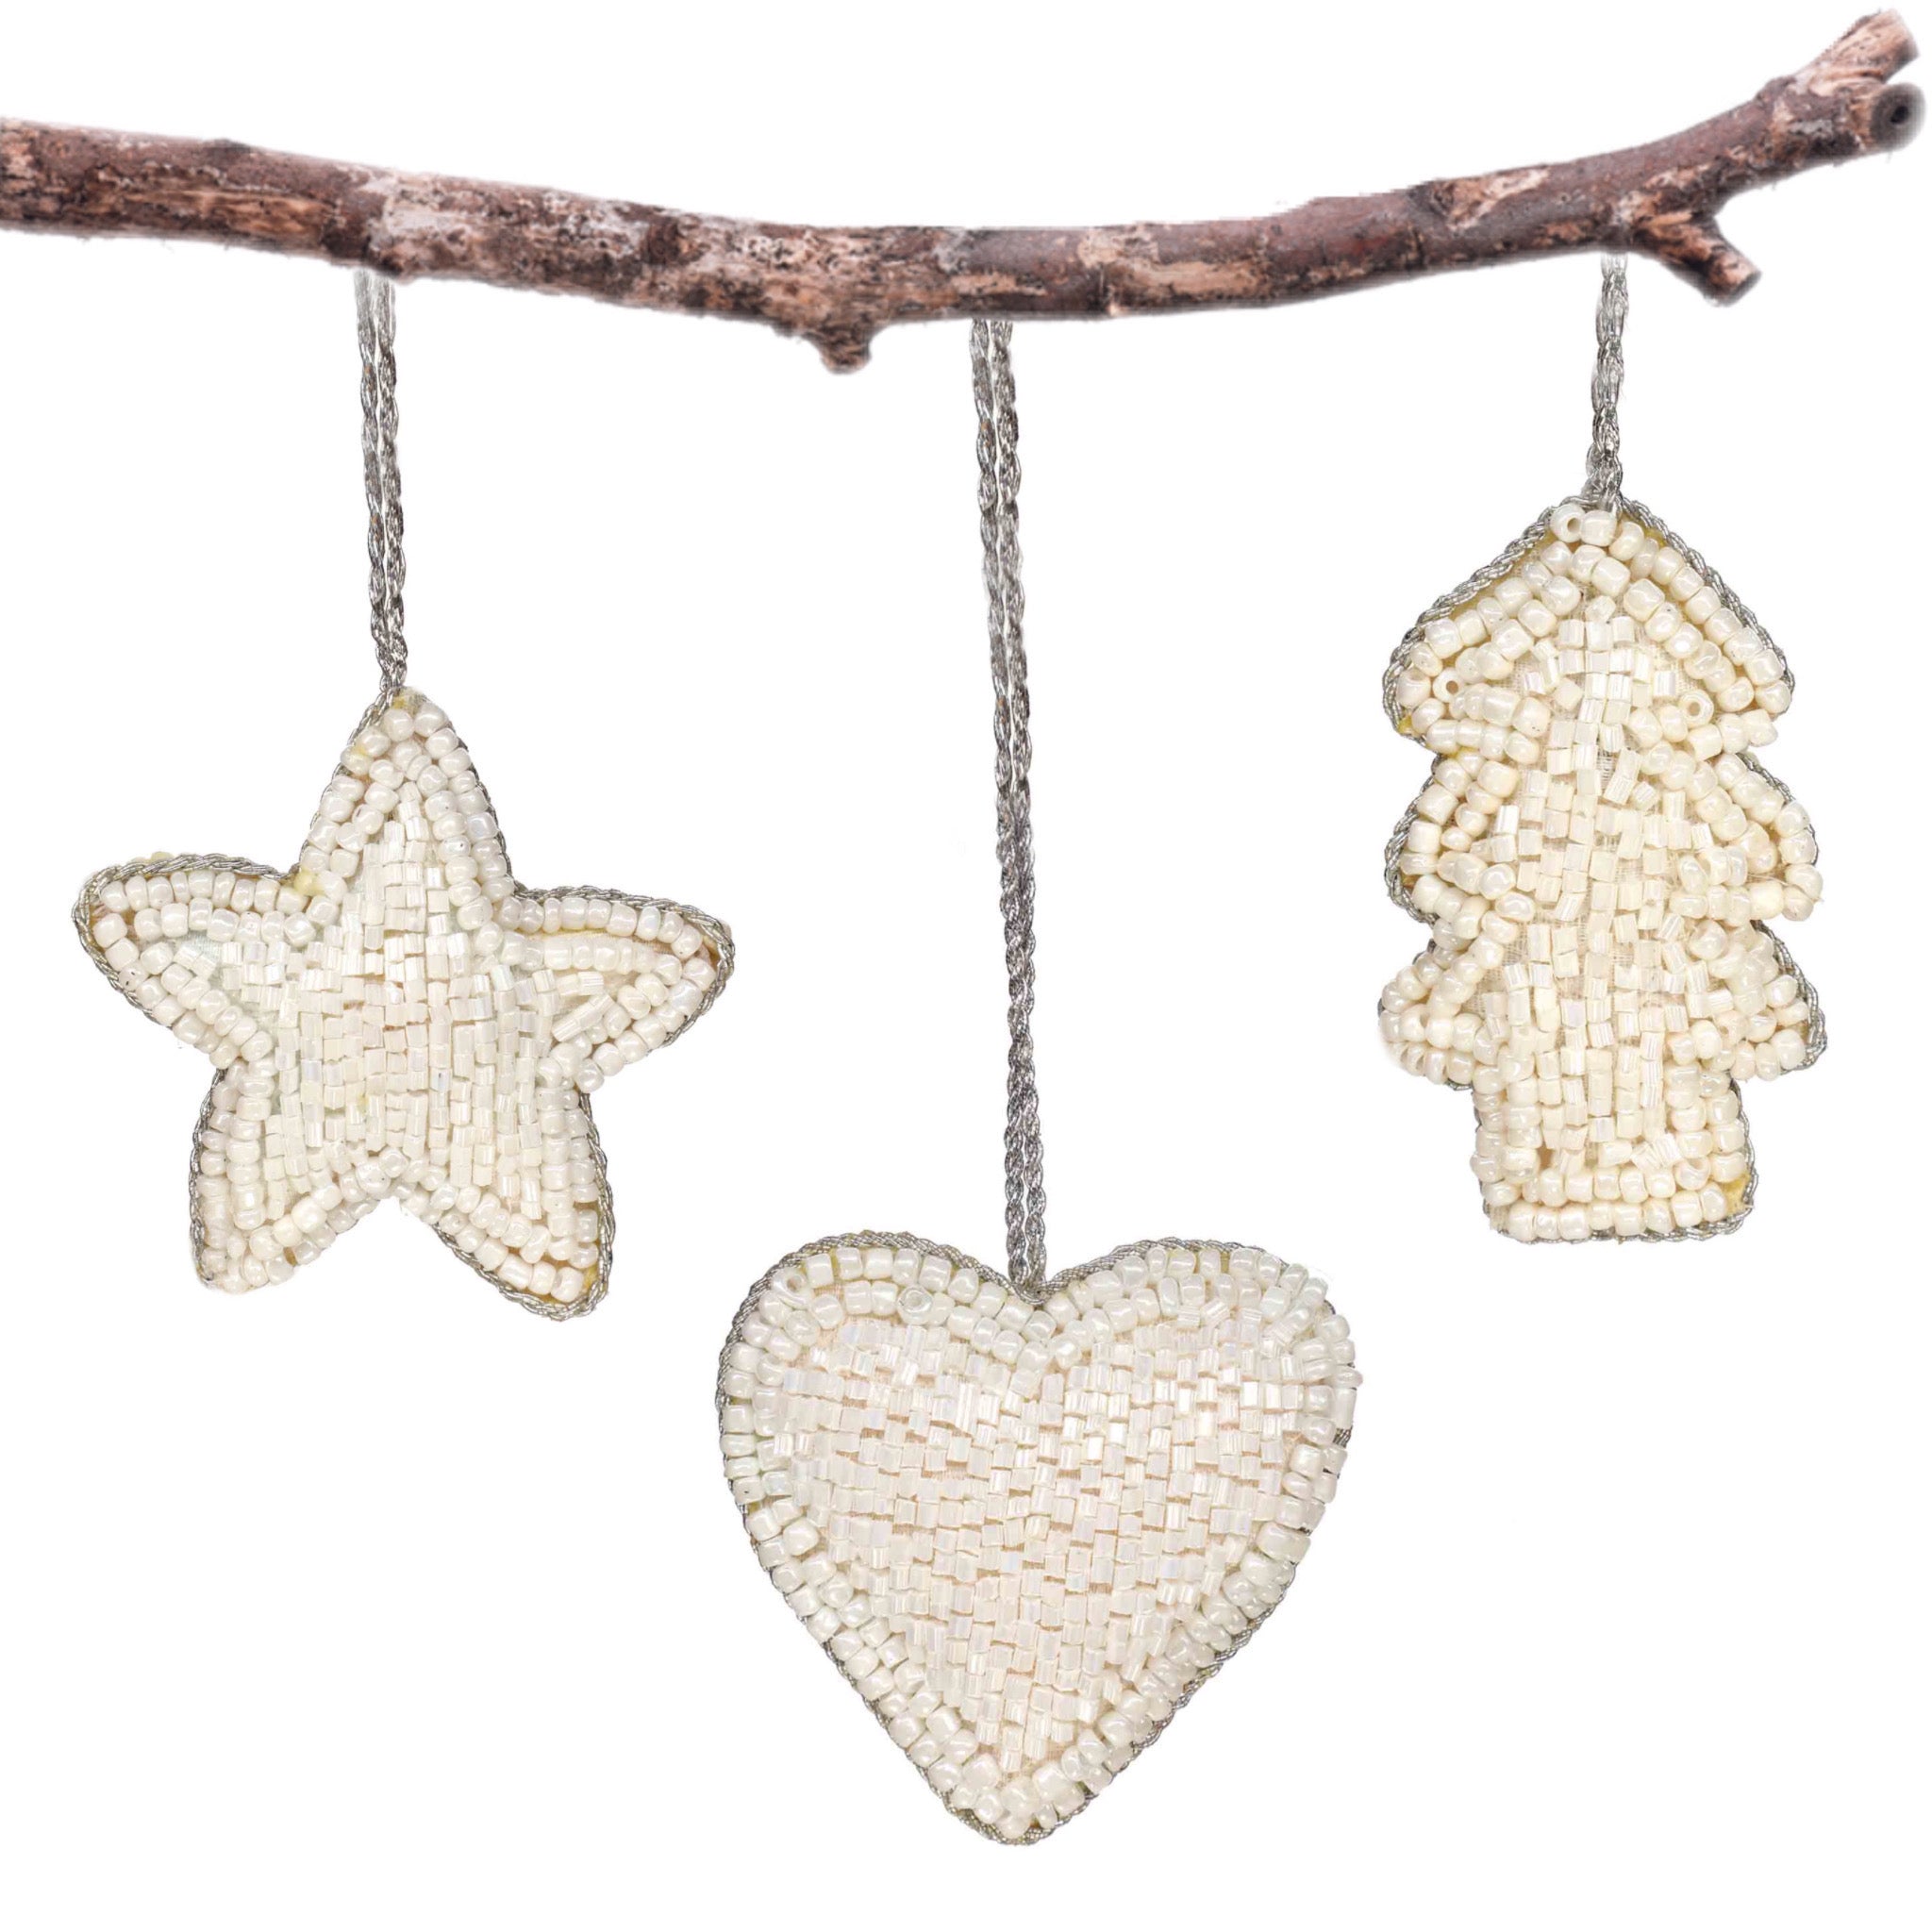 3 Wishes Embroidered Plush Hanging in White, Set of 3